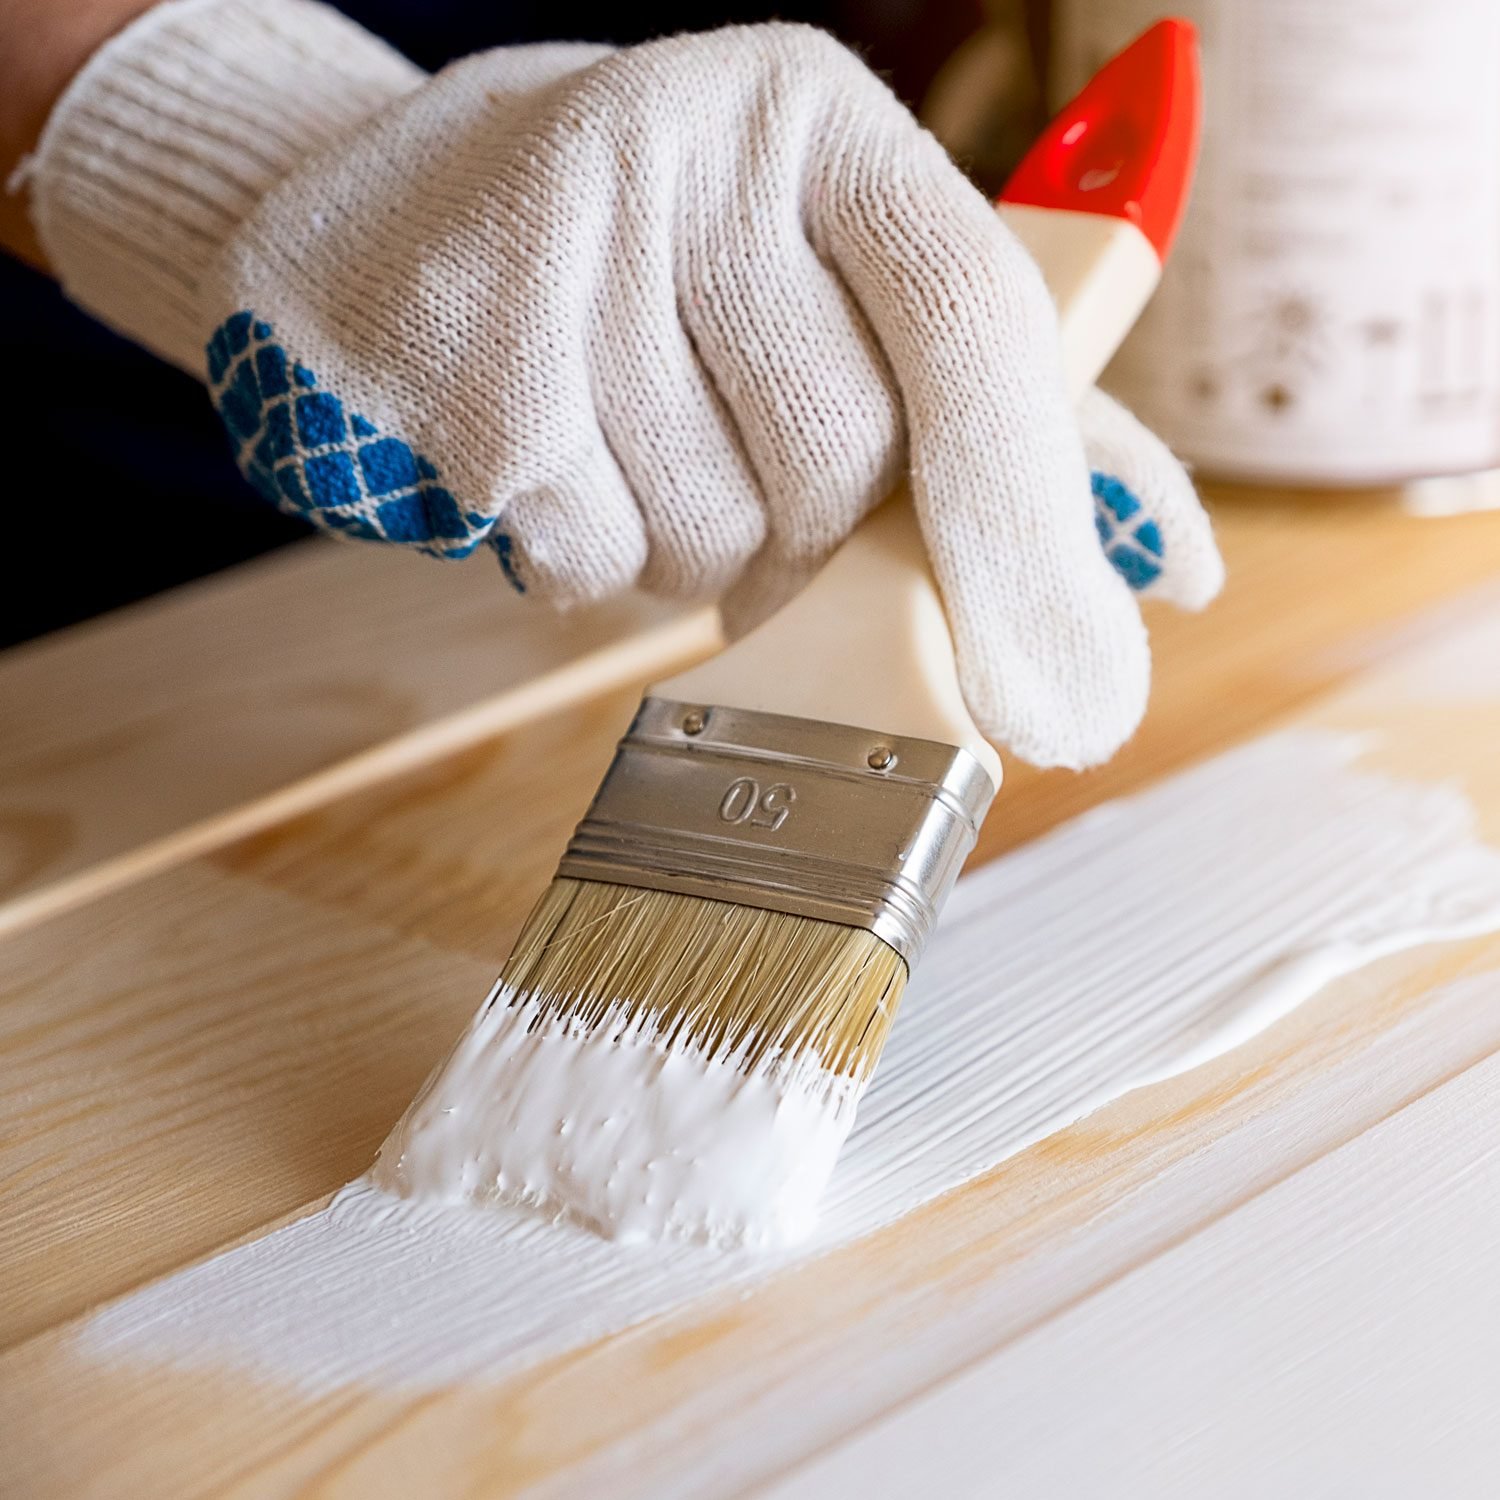 These Paint Roller Tips Will Save Time, Money and Mess